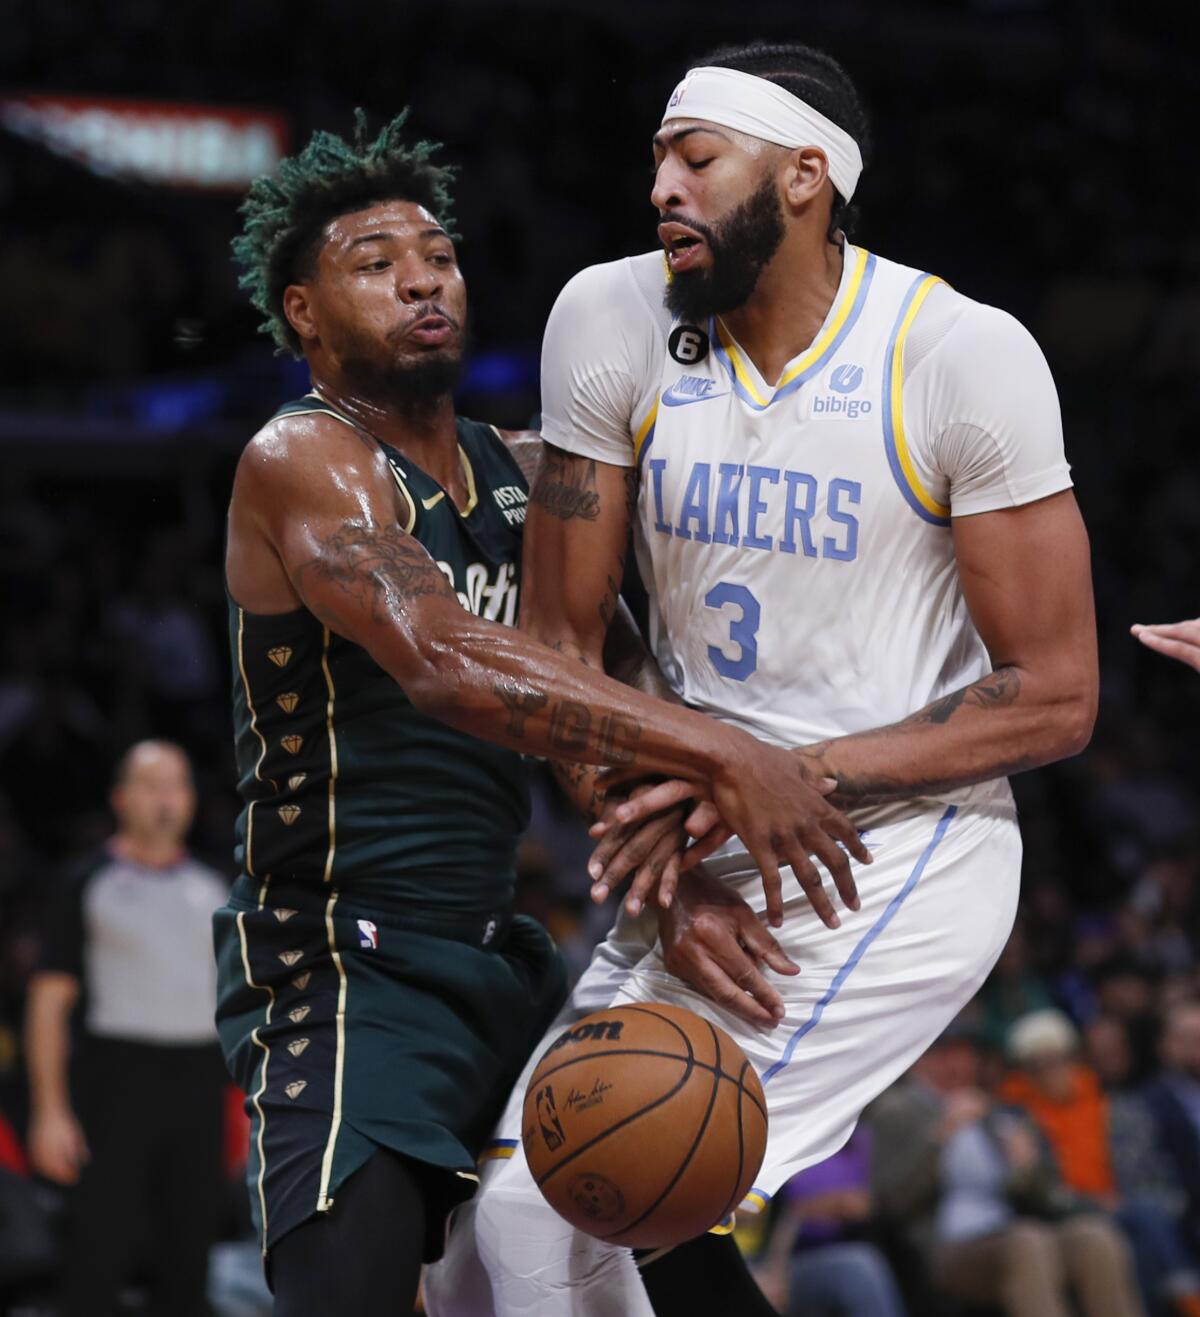 Boston Celtics guard Marcus Smart strips the ball from Lakers forward Anthony Davis.